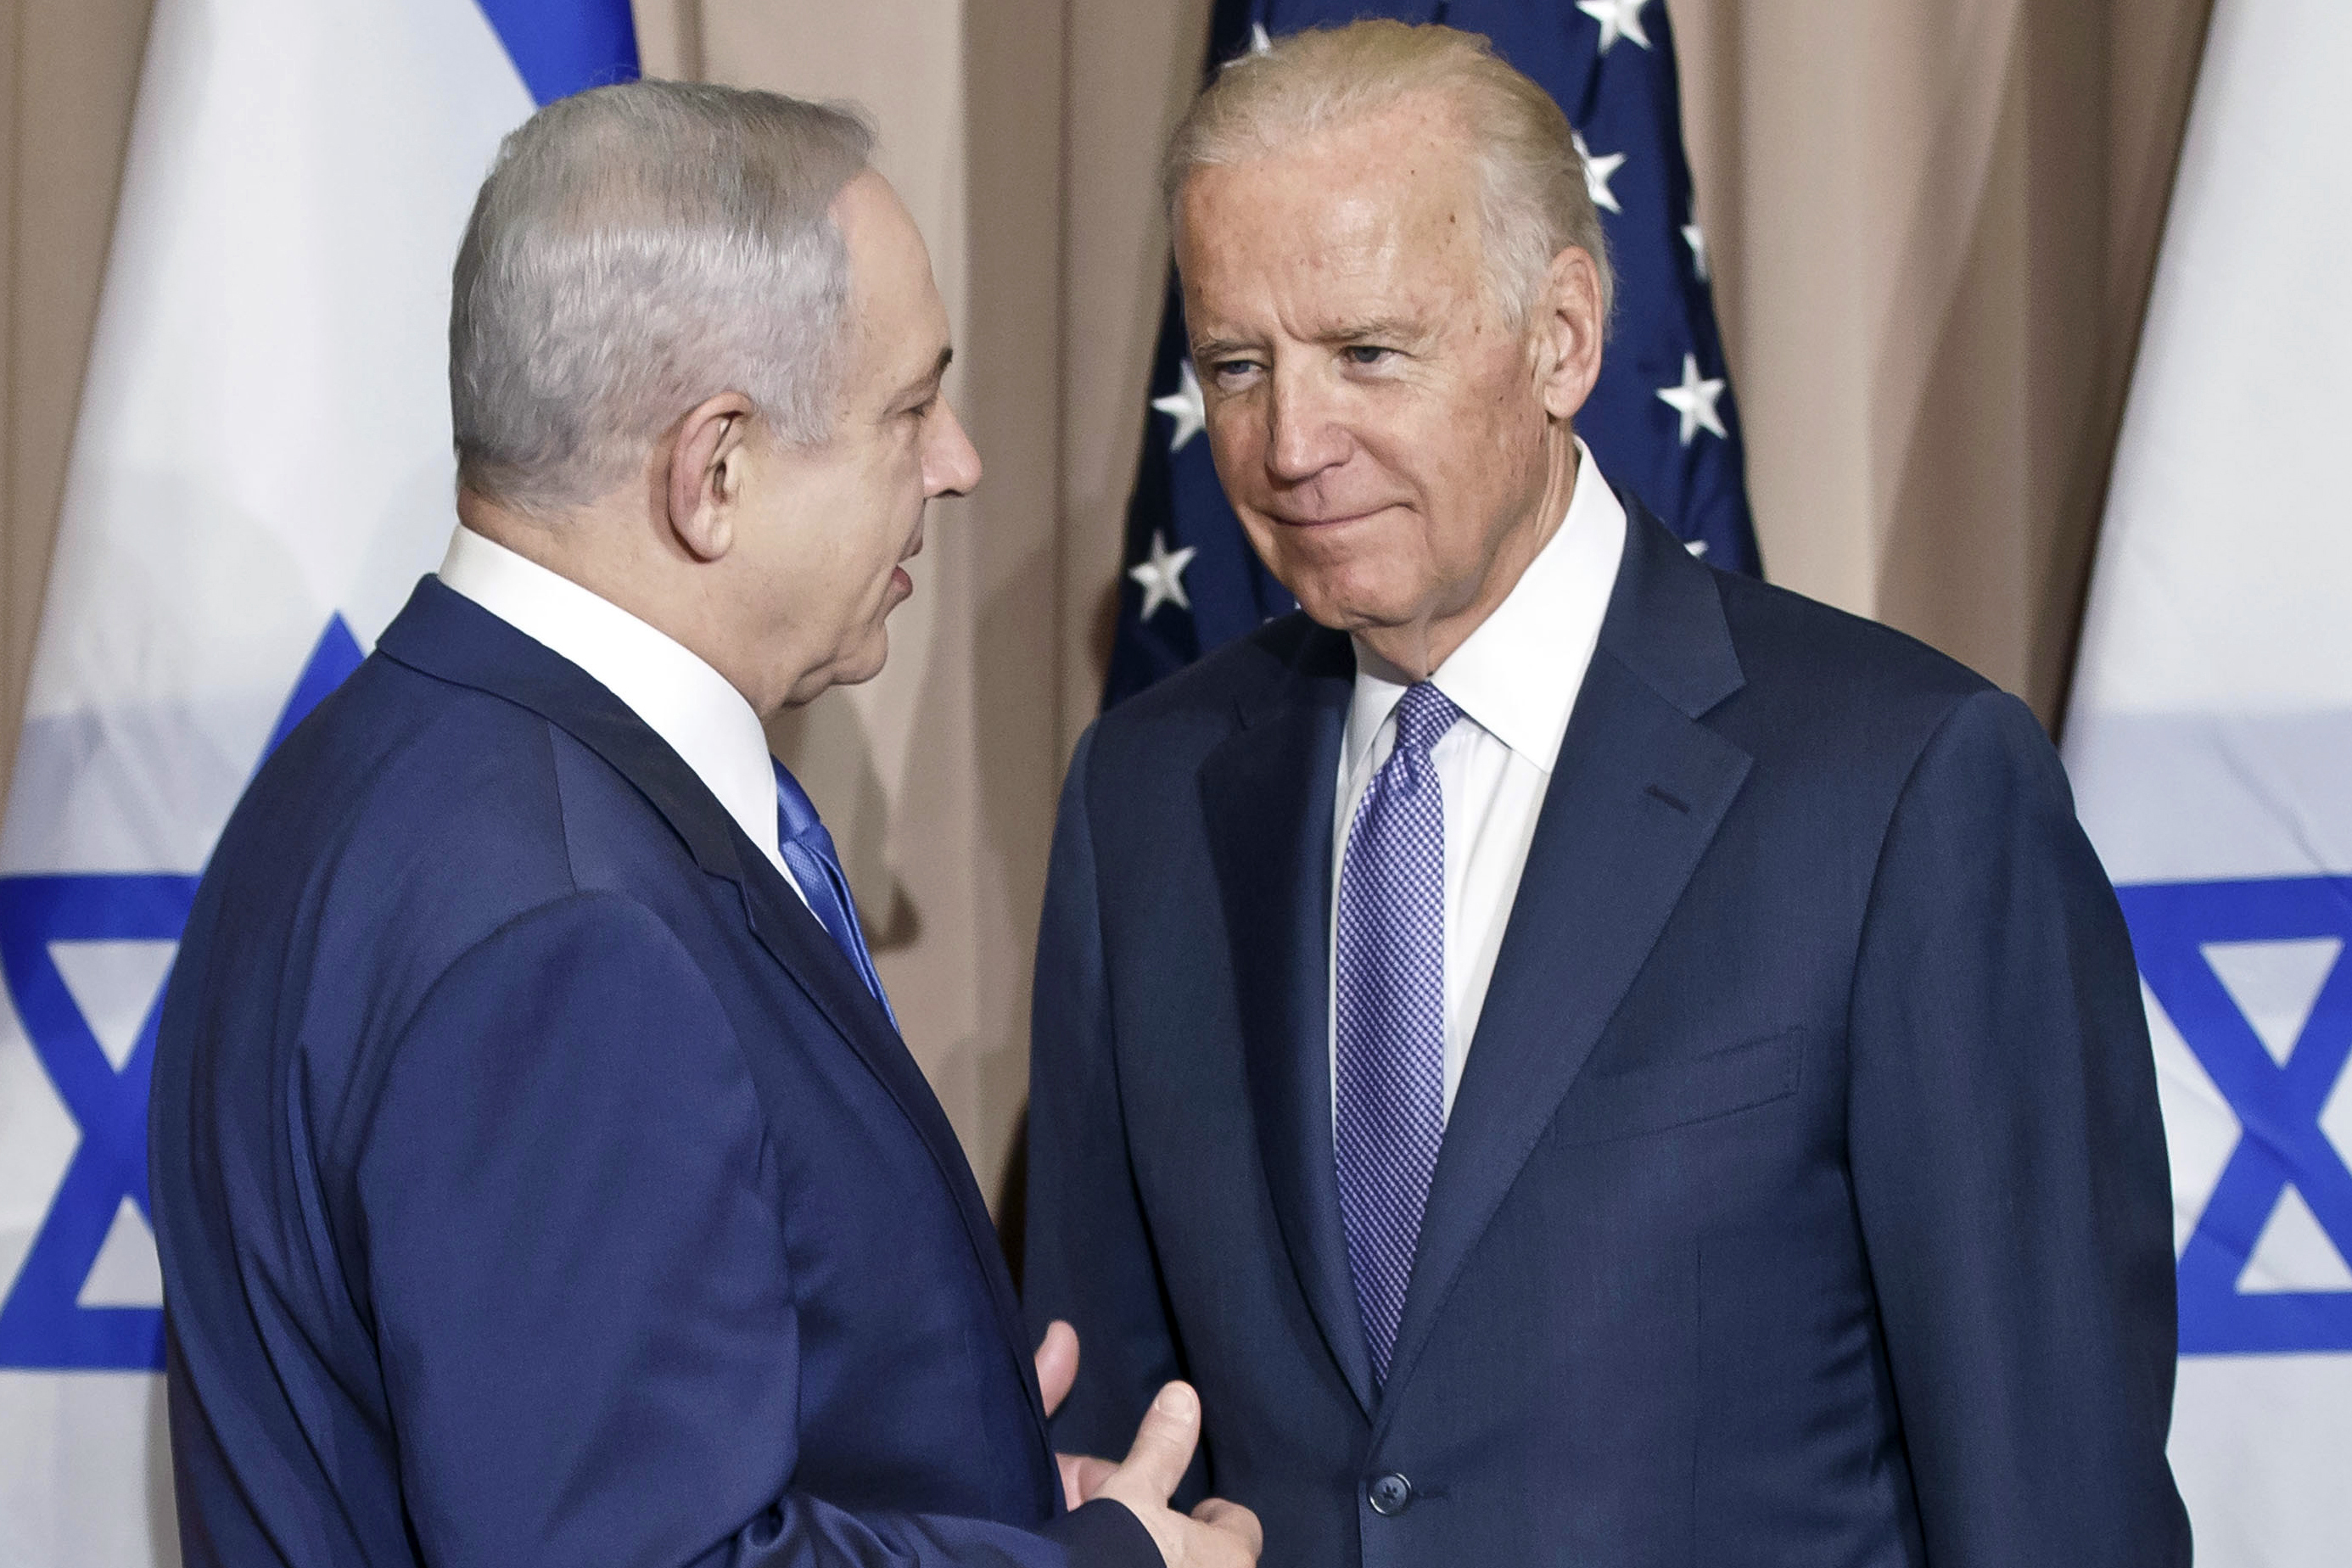 Israel sees U.S. support slipping away...and Iran noticing, too